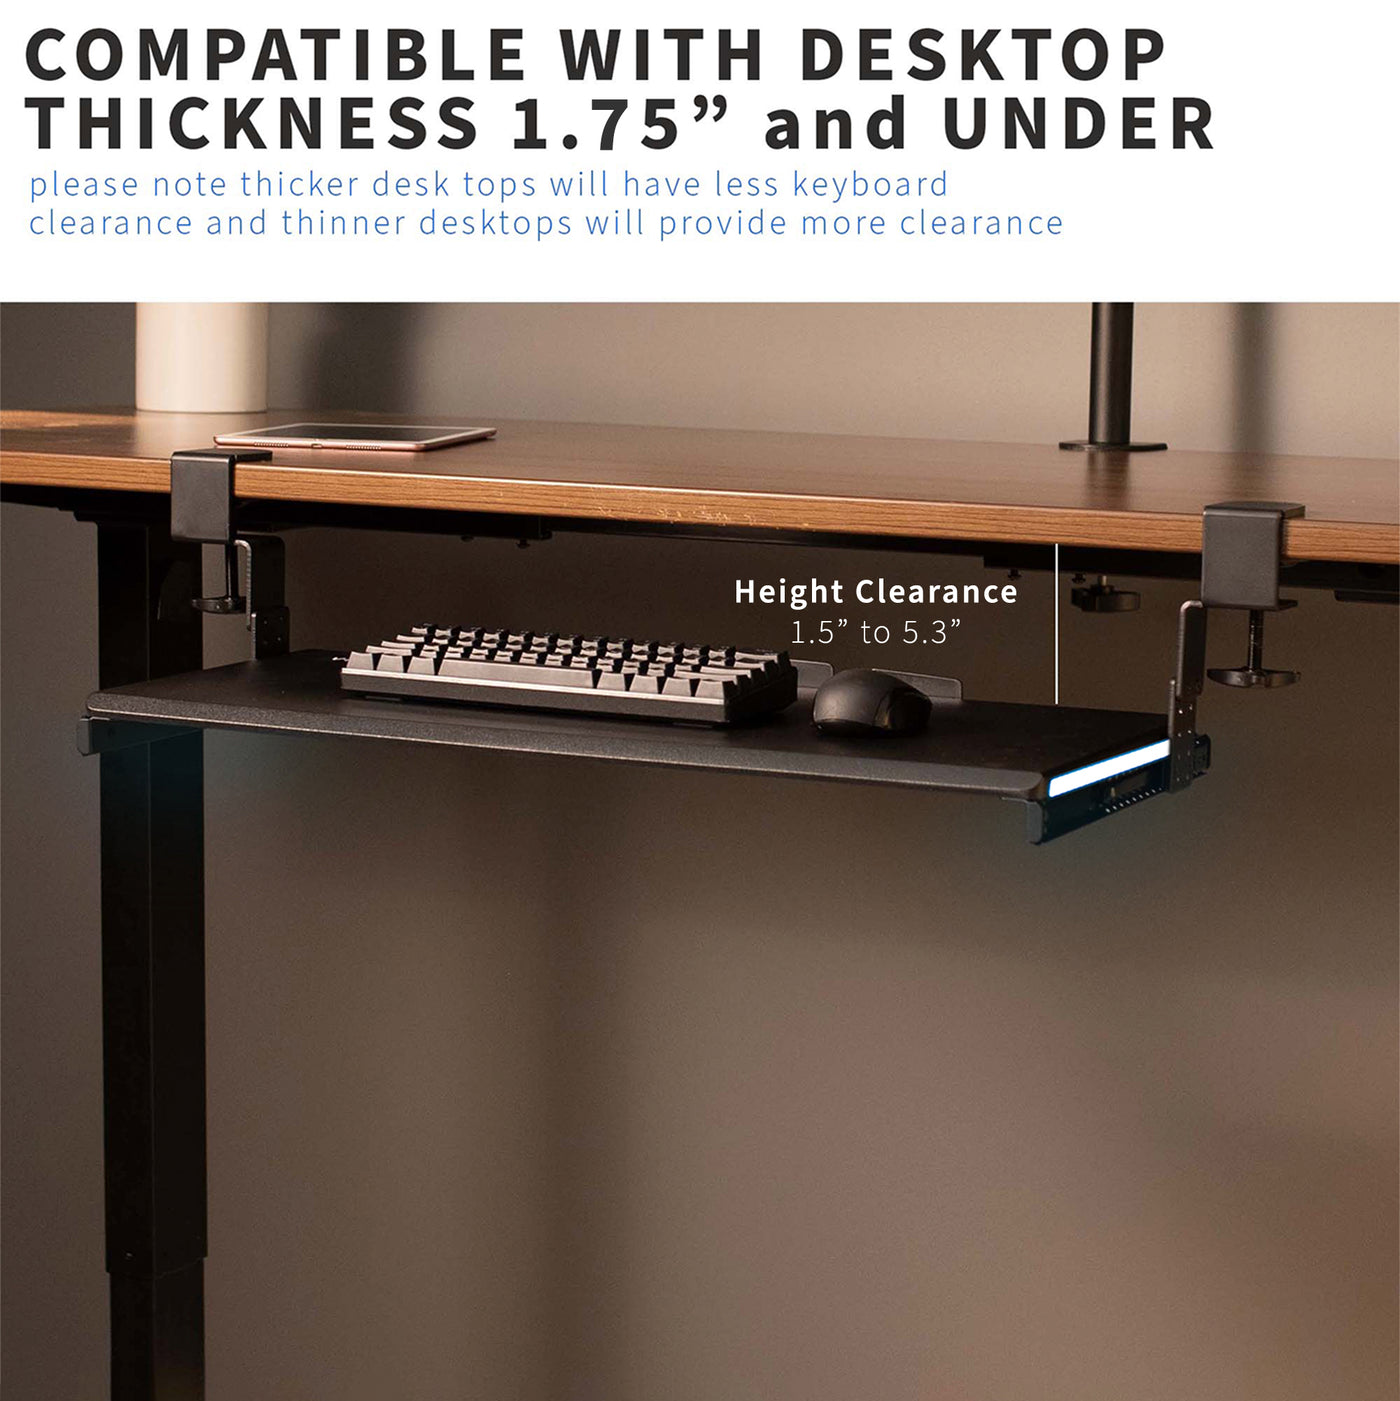 Tray is compatible with desktops up to 1.75” thick to still allow for under-desk clearance of keyboard and mouse.